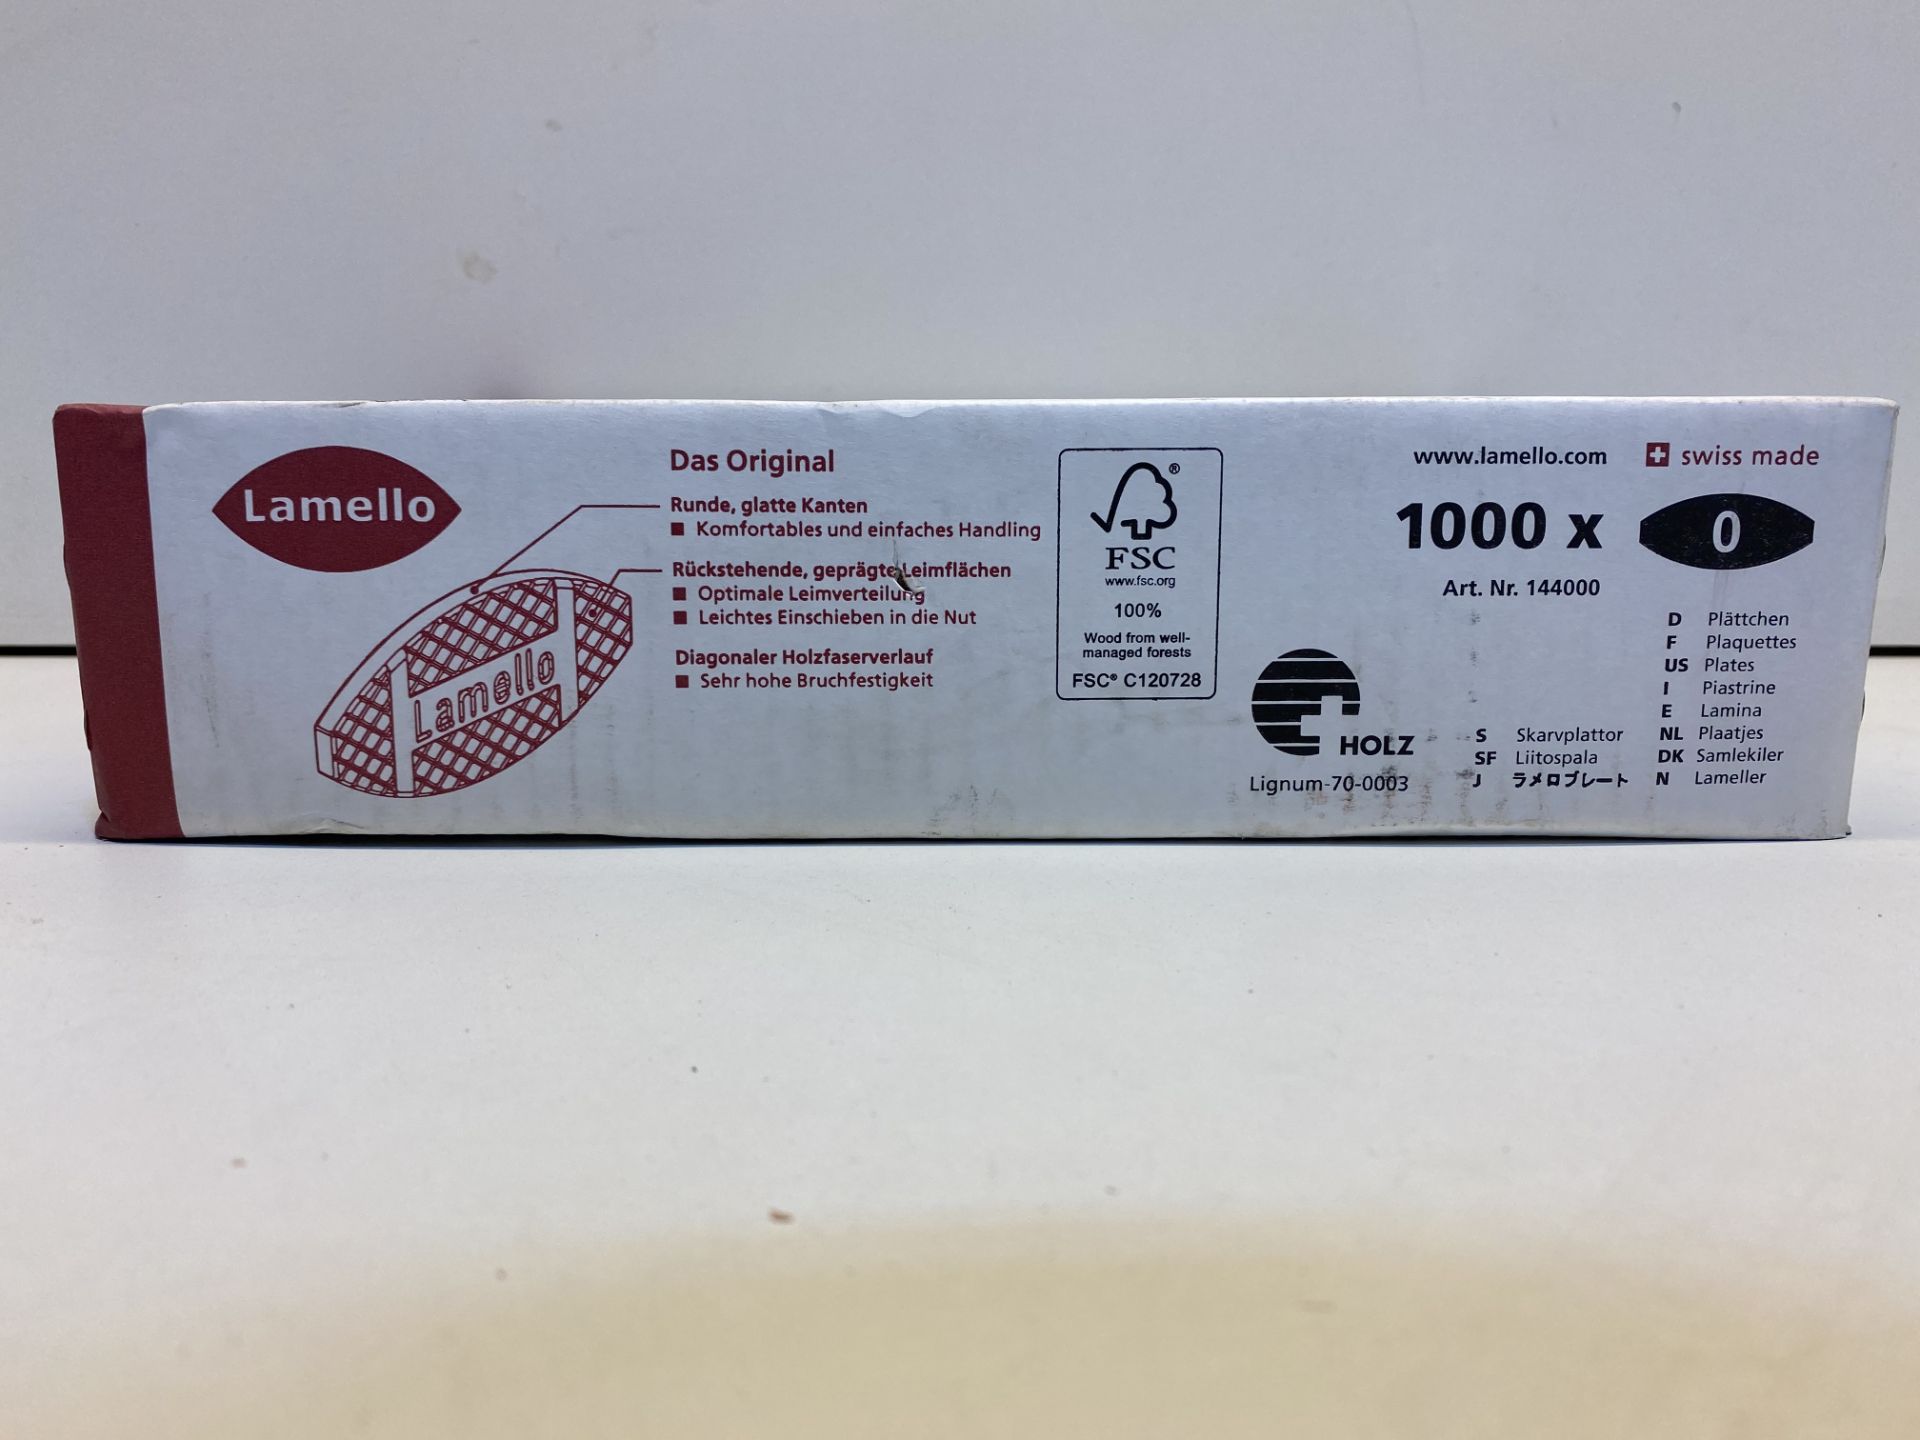 2 x Lamello Biscuits - Size 0 (Box of 1,000) - Image 5 of 5